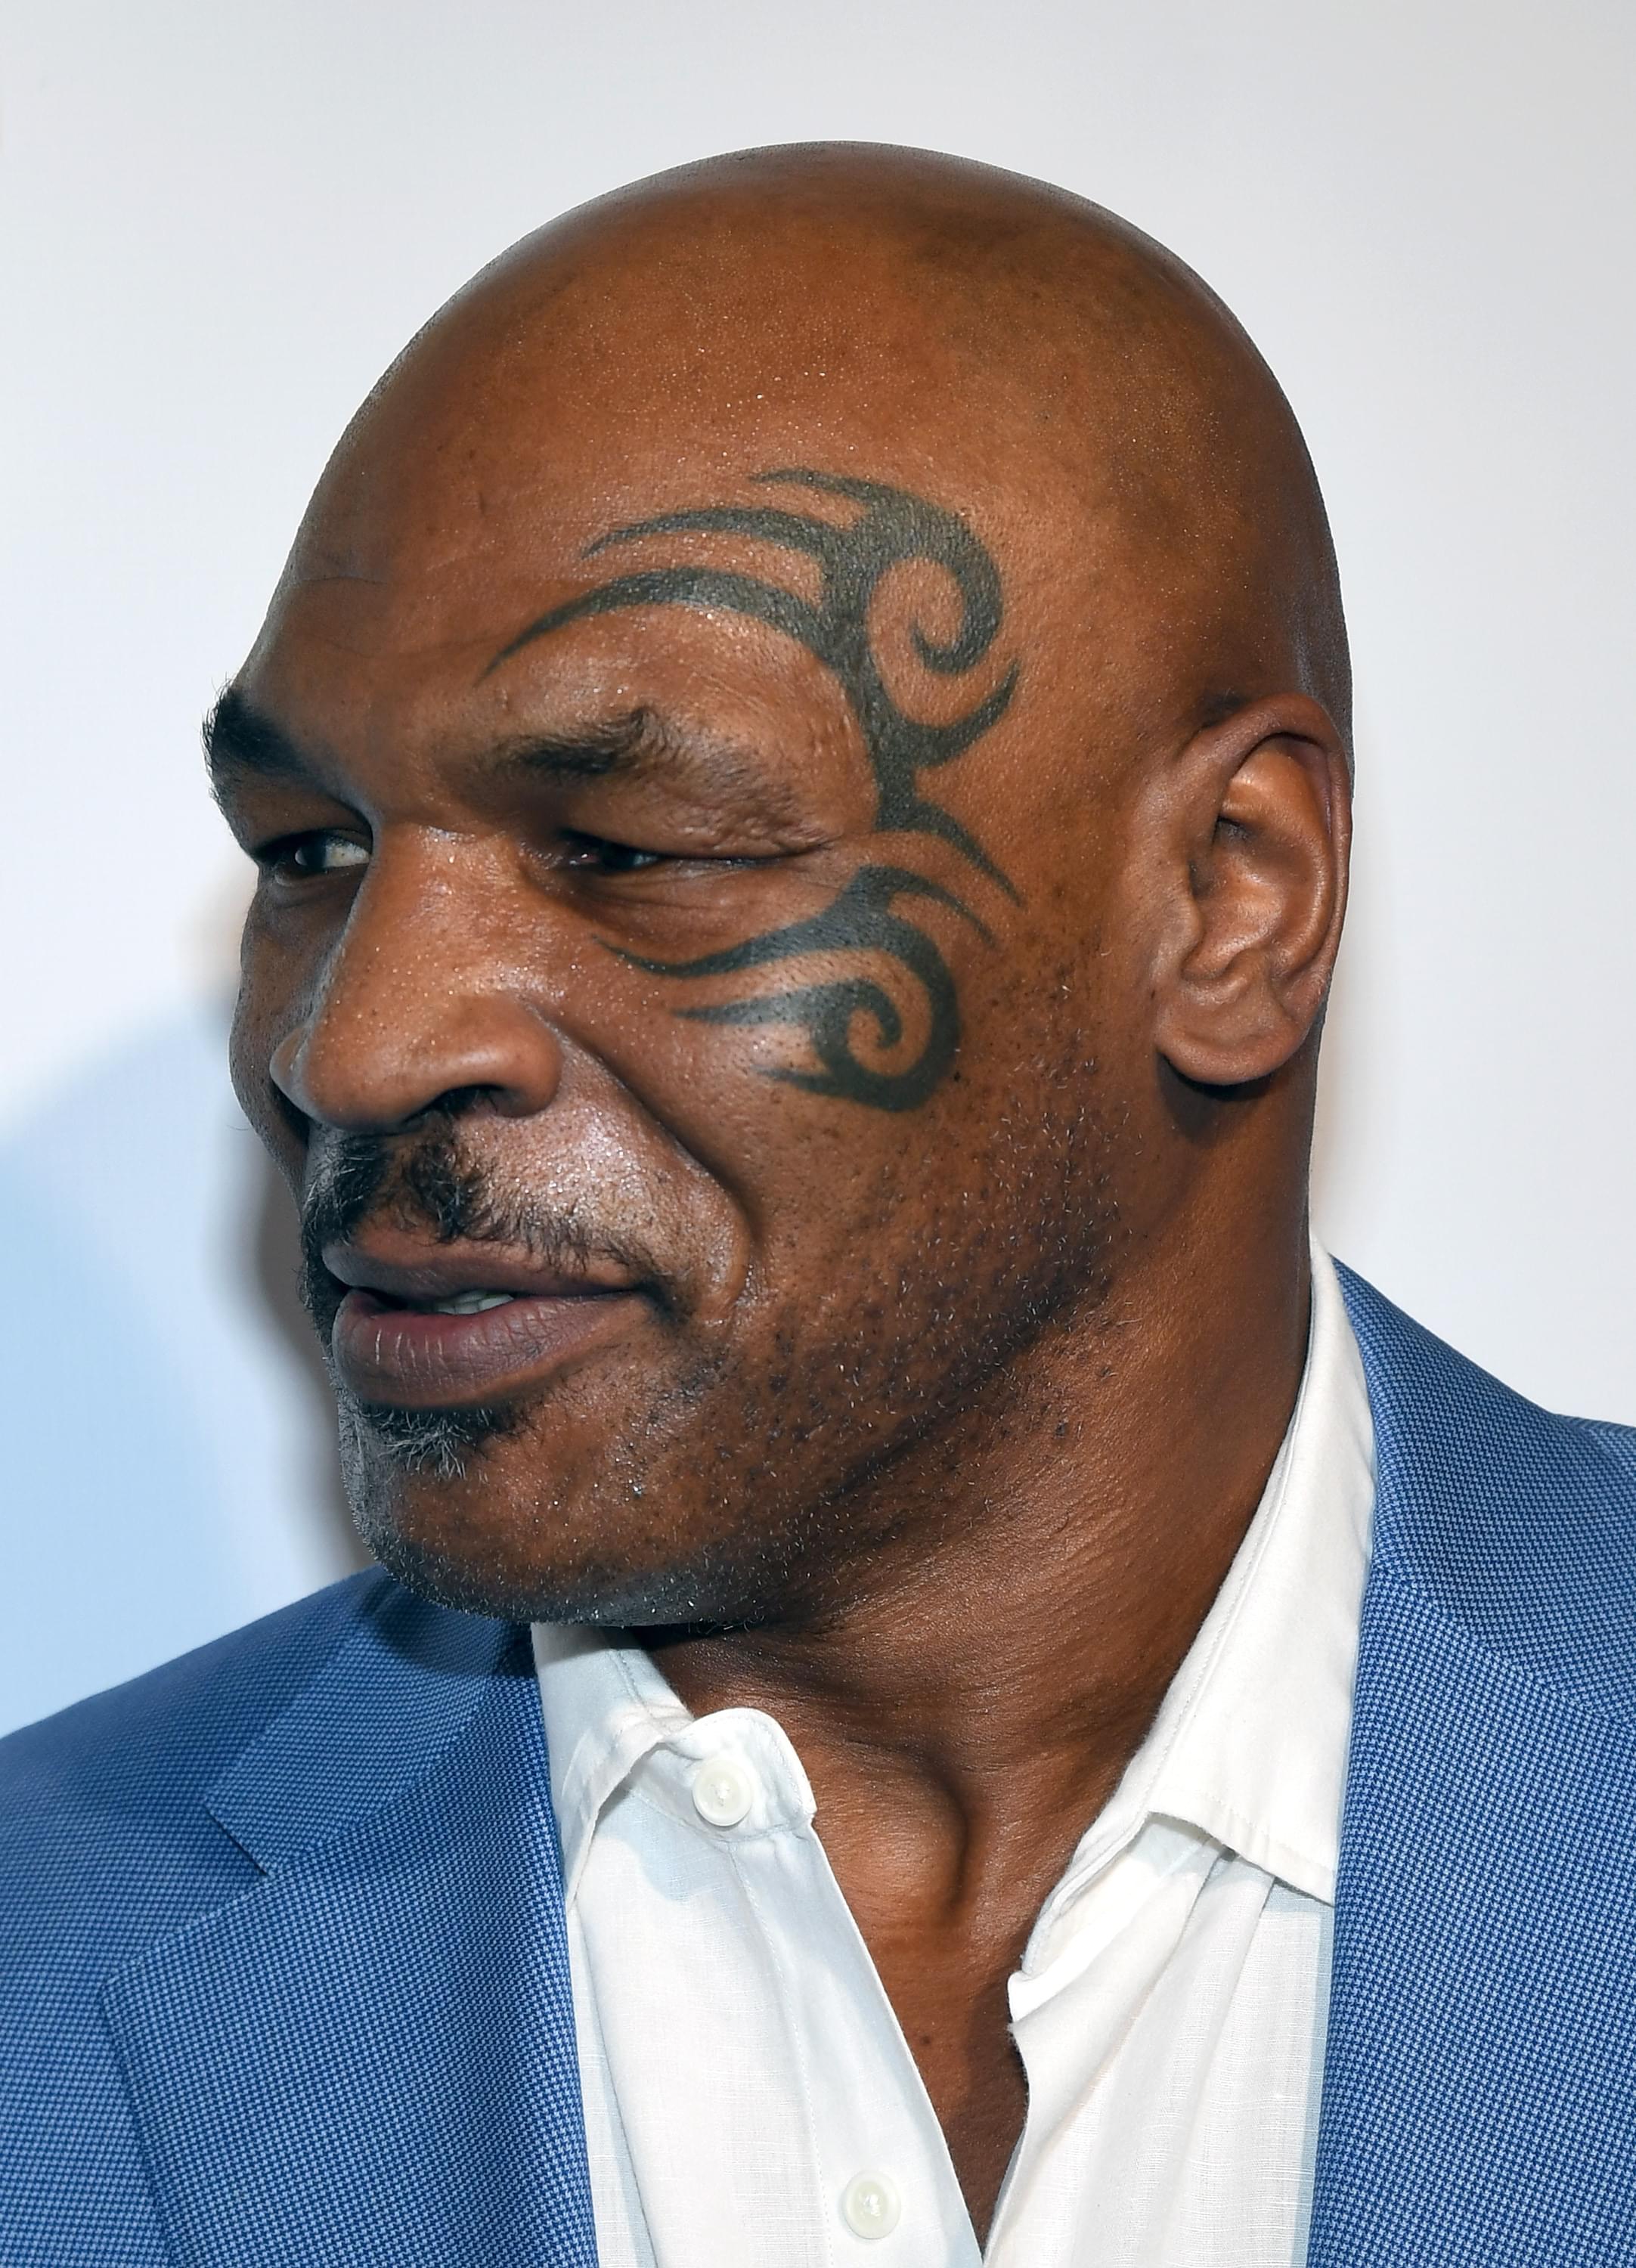 Mike Tyson Drops A Diss Track To Soulja Boy “If You Show Up” [WATCH]